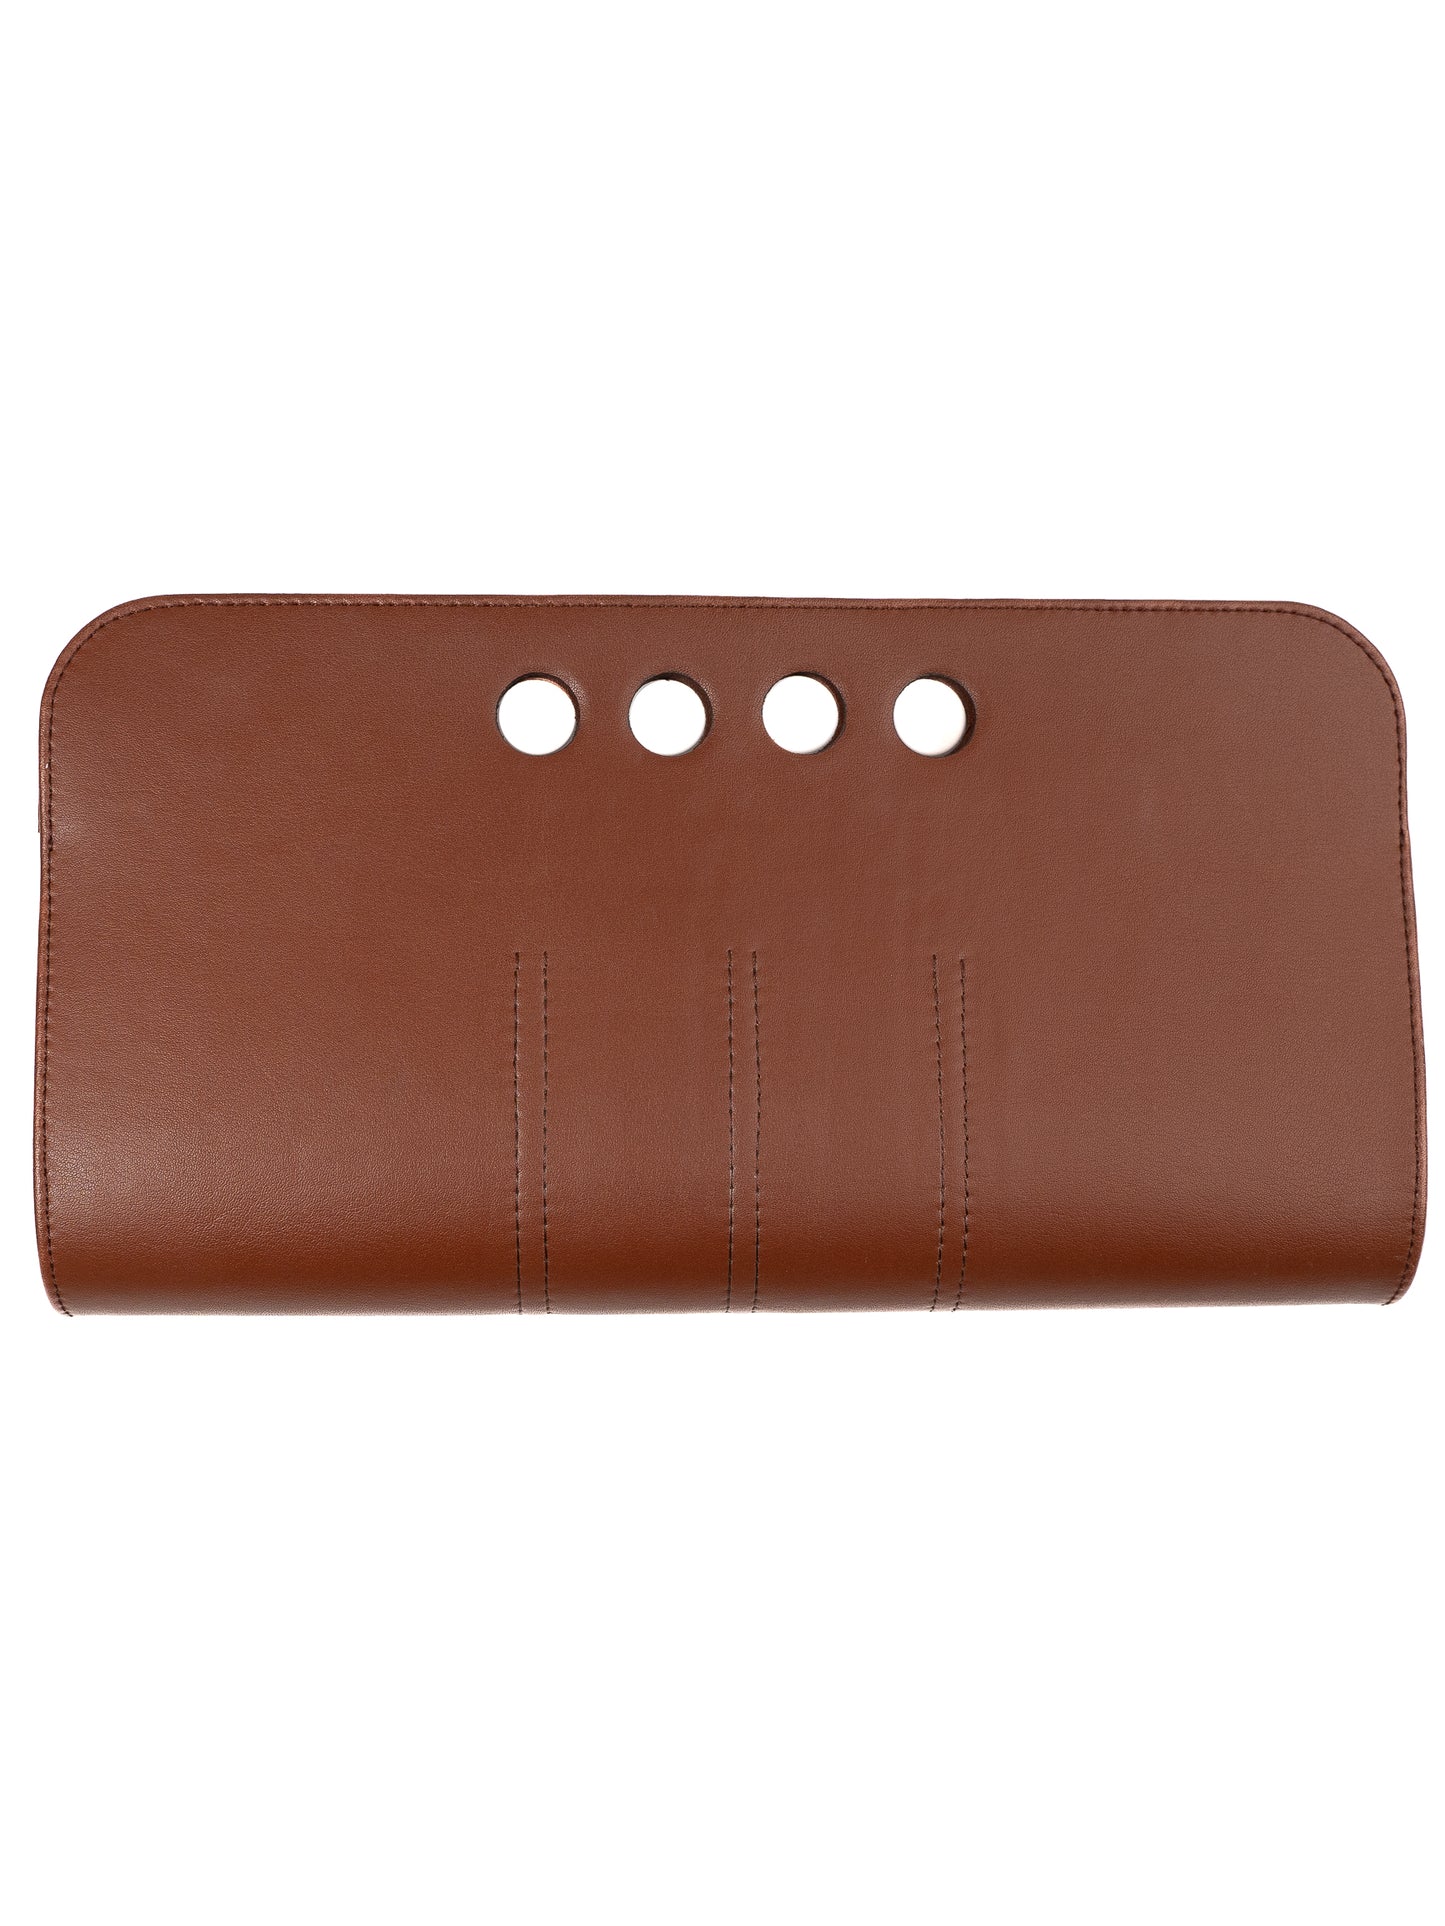 Chic Vegan Leather Clutch - Brown/Small